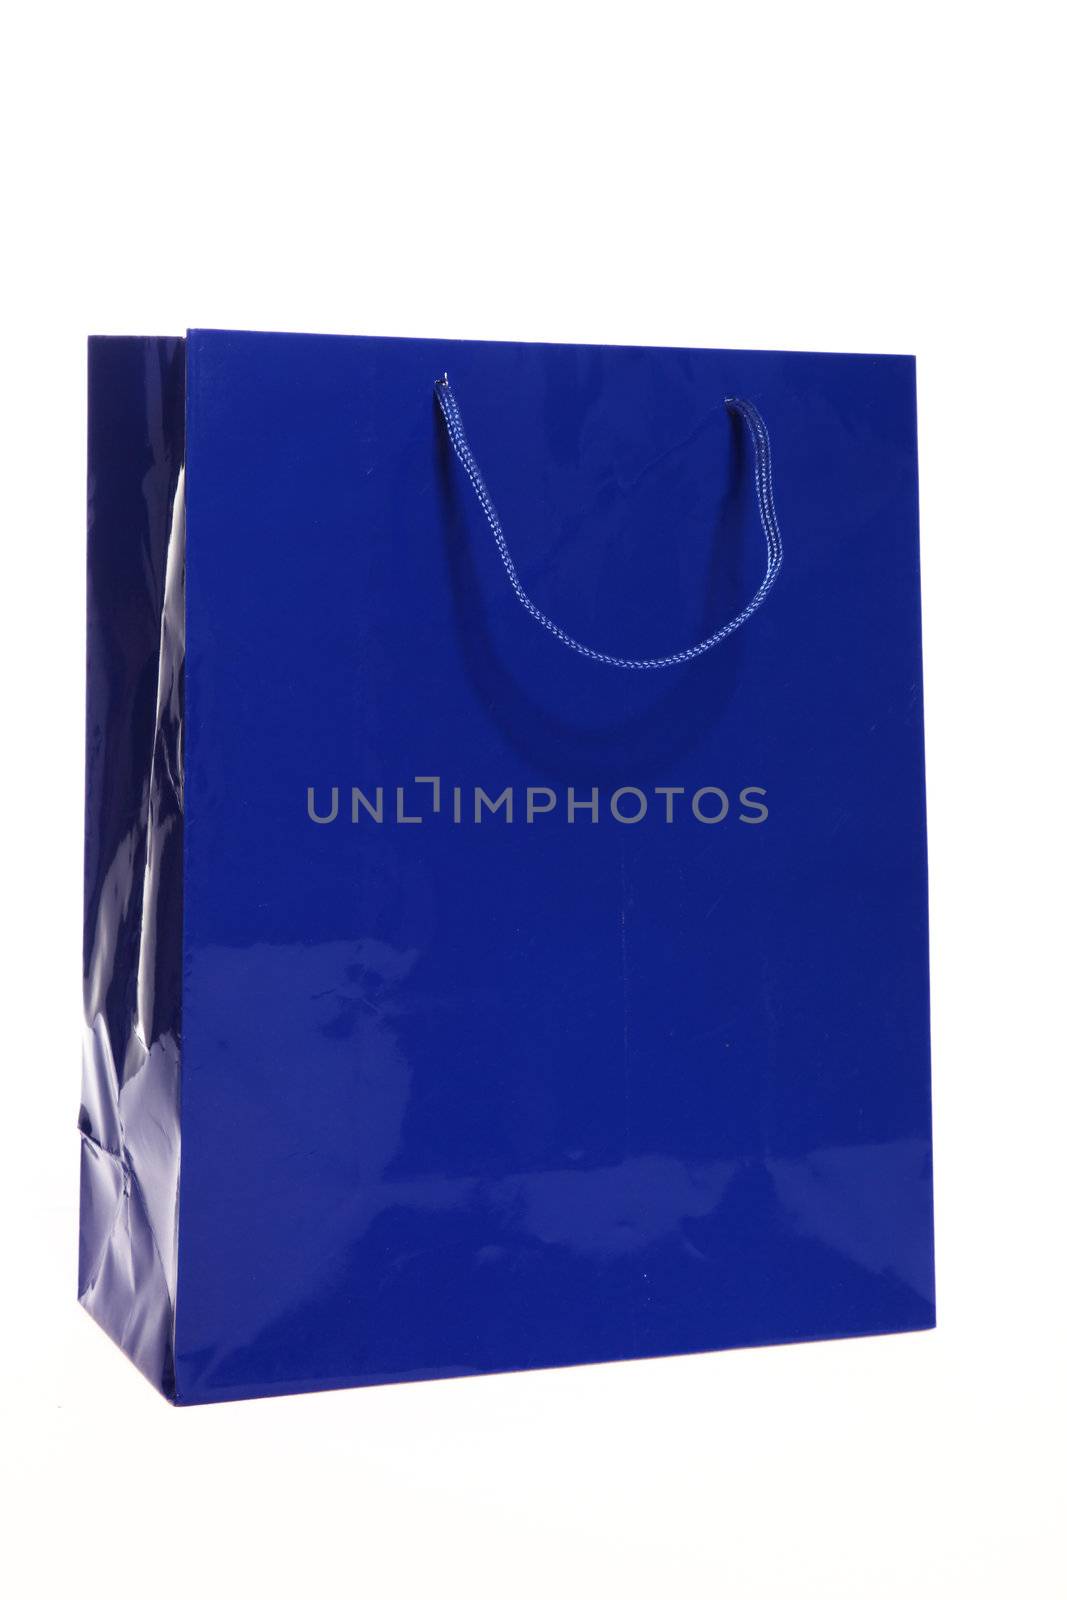 Blue paper shopping or carrier bag for packaging gifts or as a recyclable container for purchases on a shopping spree isolated on white